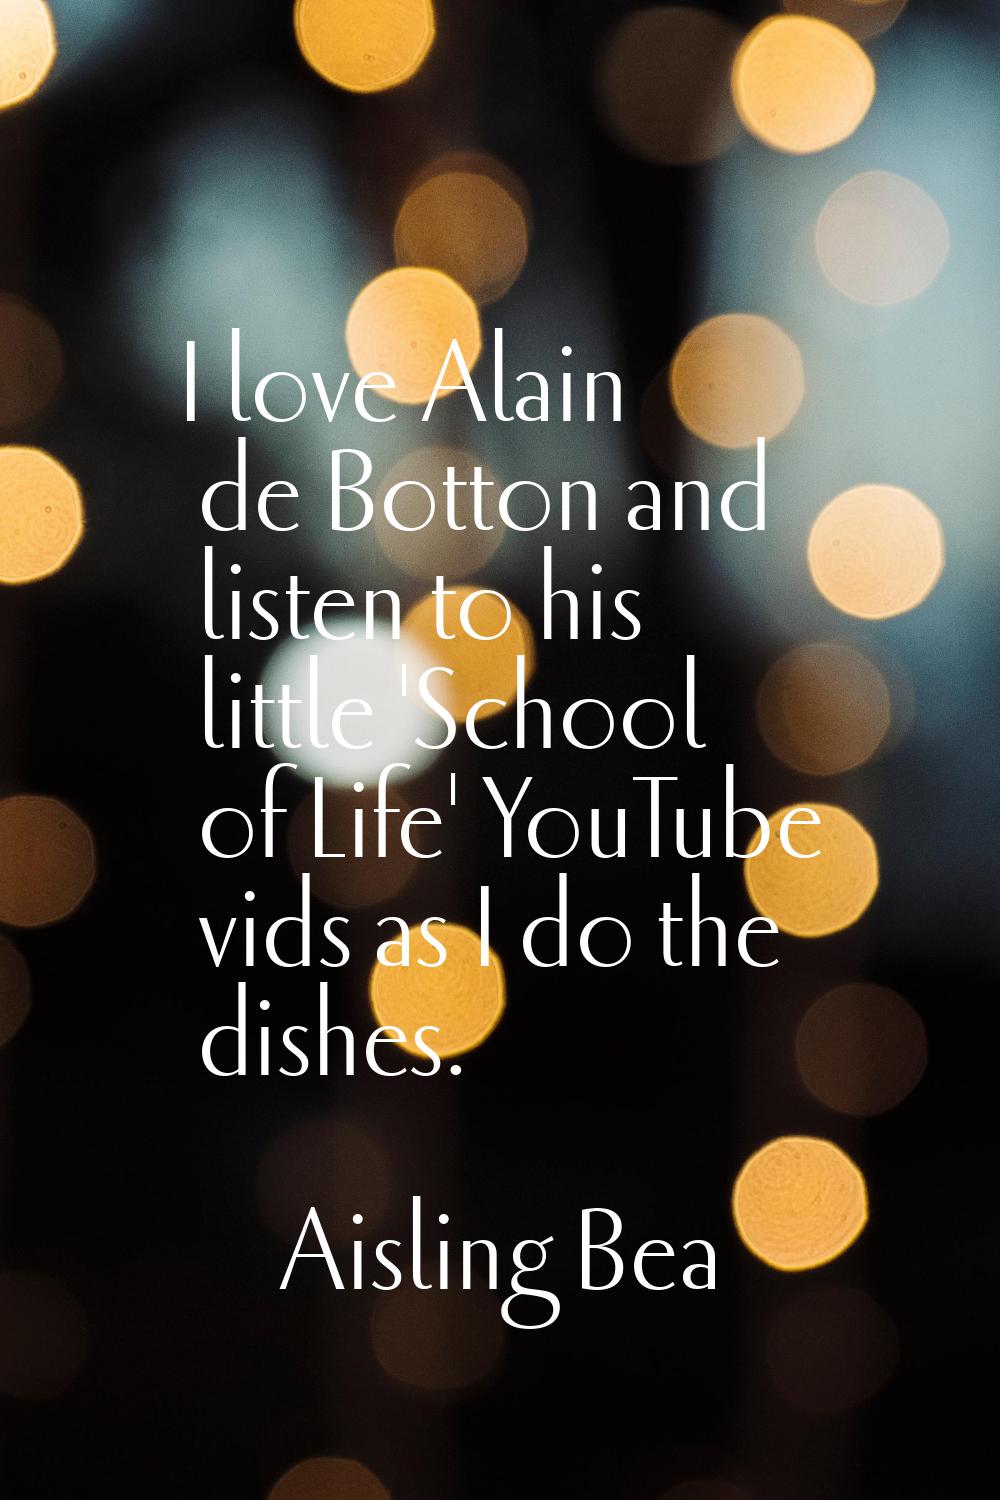 I love Alain de Botton and listen to his little 'School of Life' YouTube vids as I do the dishes.